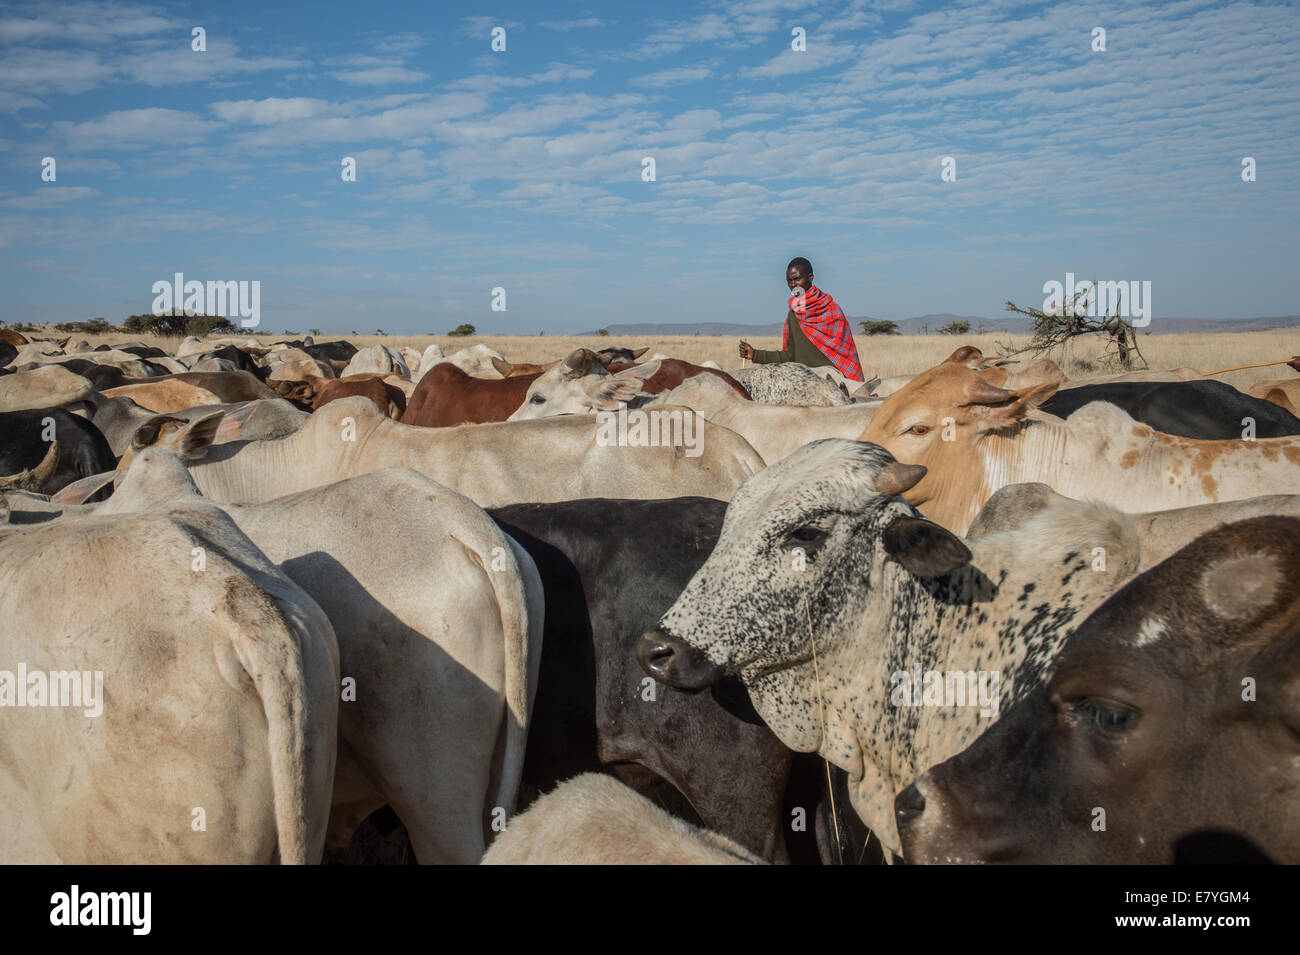 Gabrial Longisa watches cattle at Lewa Wildlife Conservancy which is part of a “Livestock to Market” business that shifts more o Stock Photo